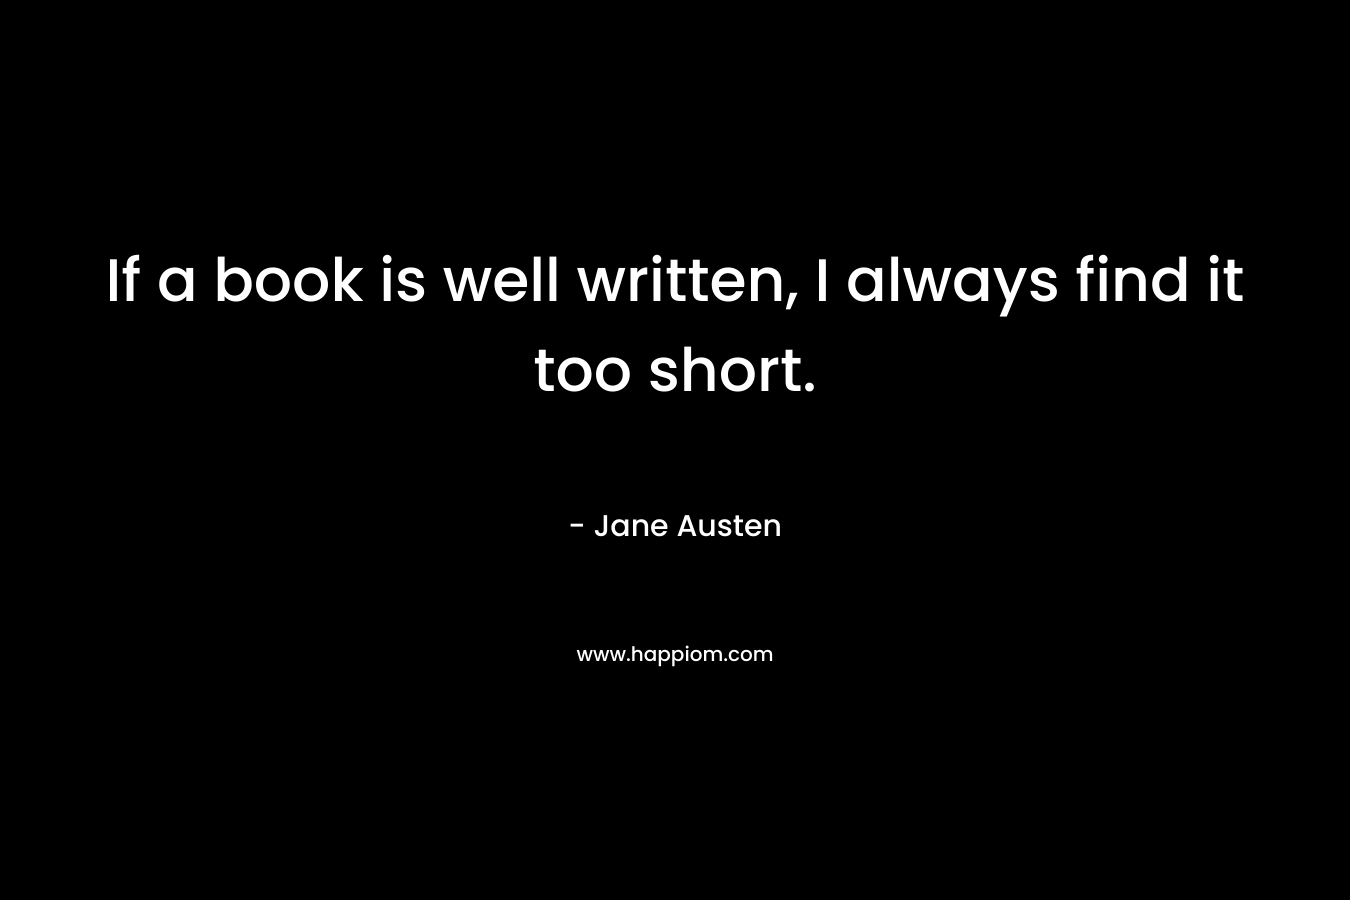 If a book is well written, I always find it too short.